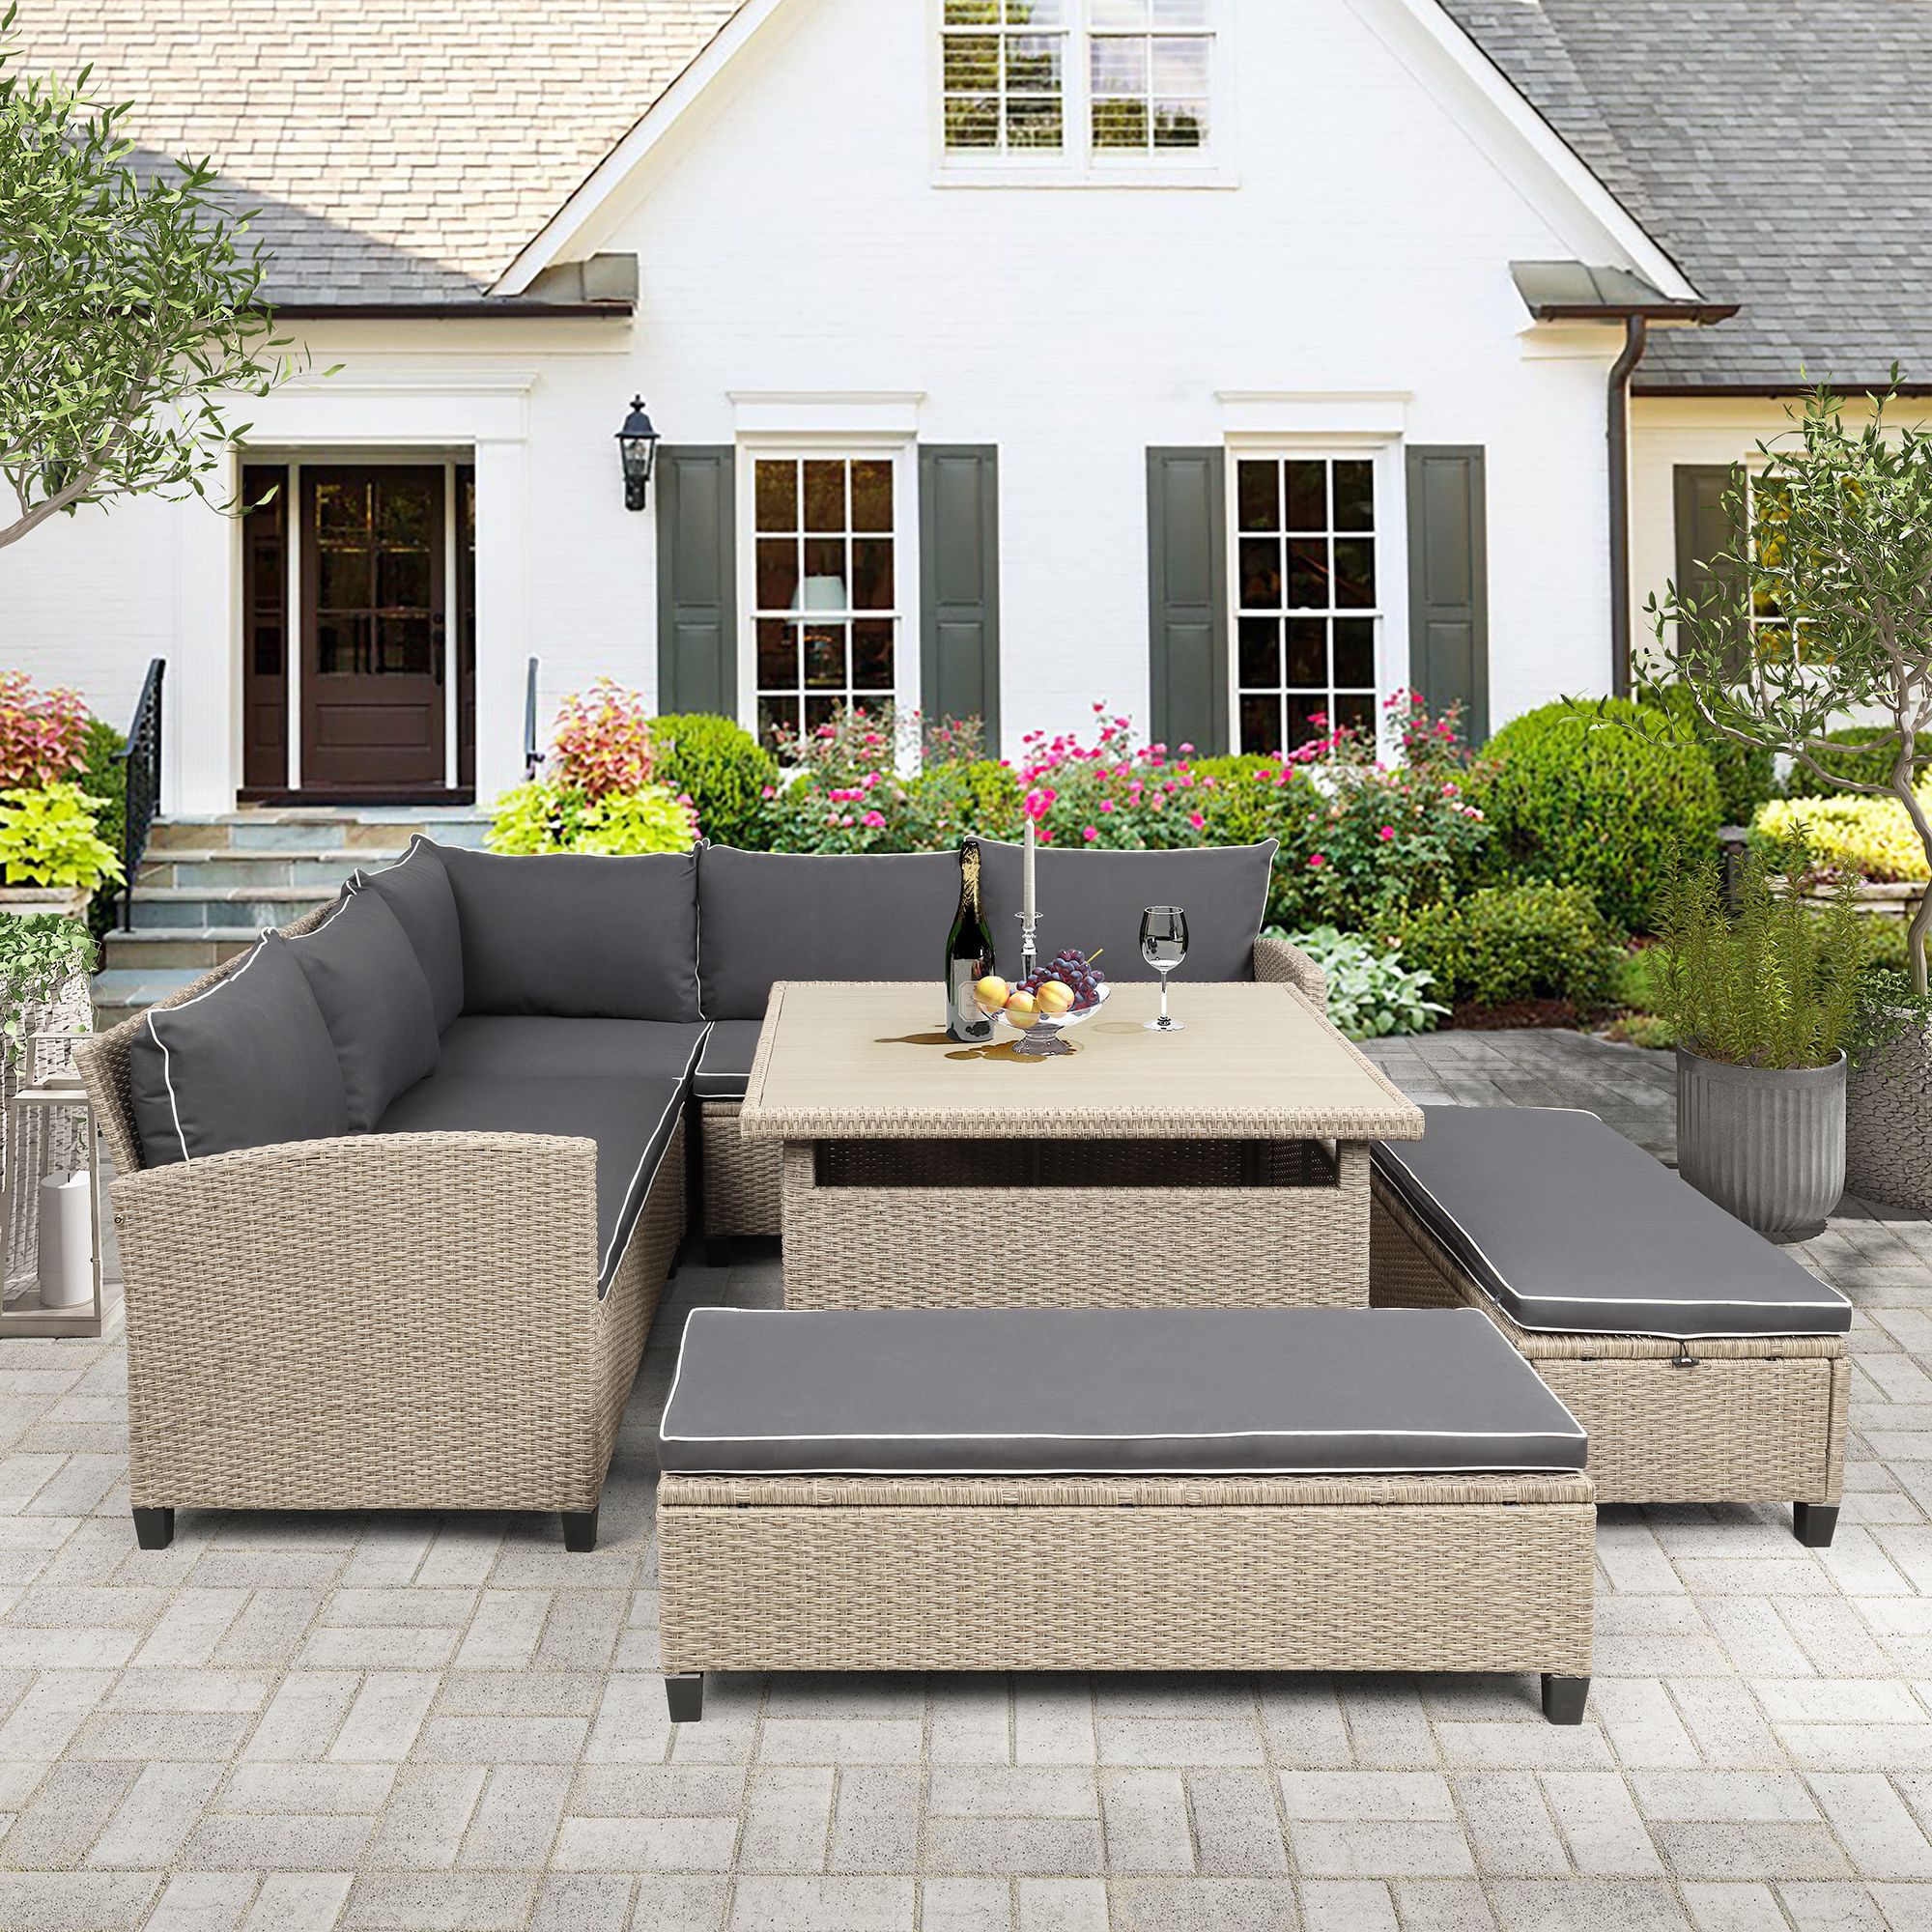 Clearance! Patio Sectional Sofa Set, 6 Piece Outdoor Patio Furniture Intended For 2020 Outdoor Seating Sectional Patio Sets (View 2 of 15)